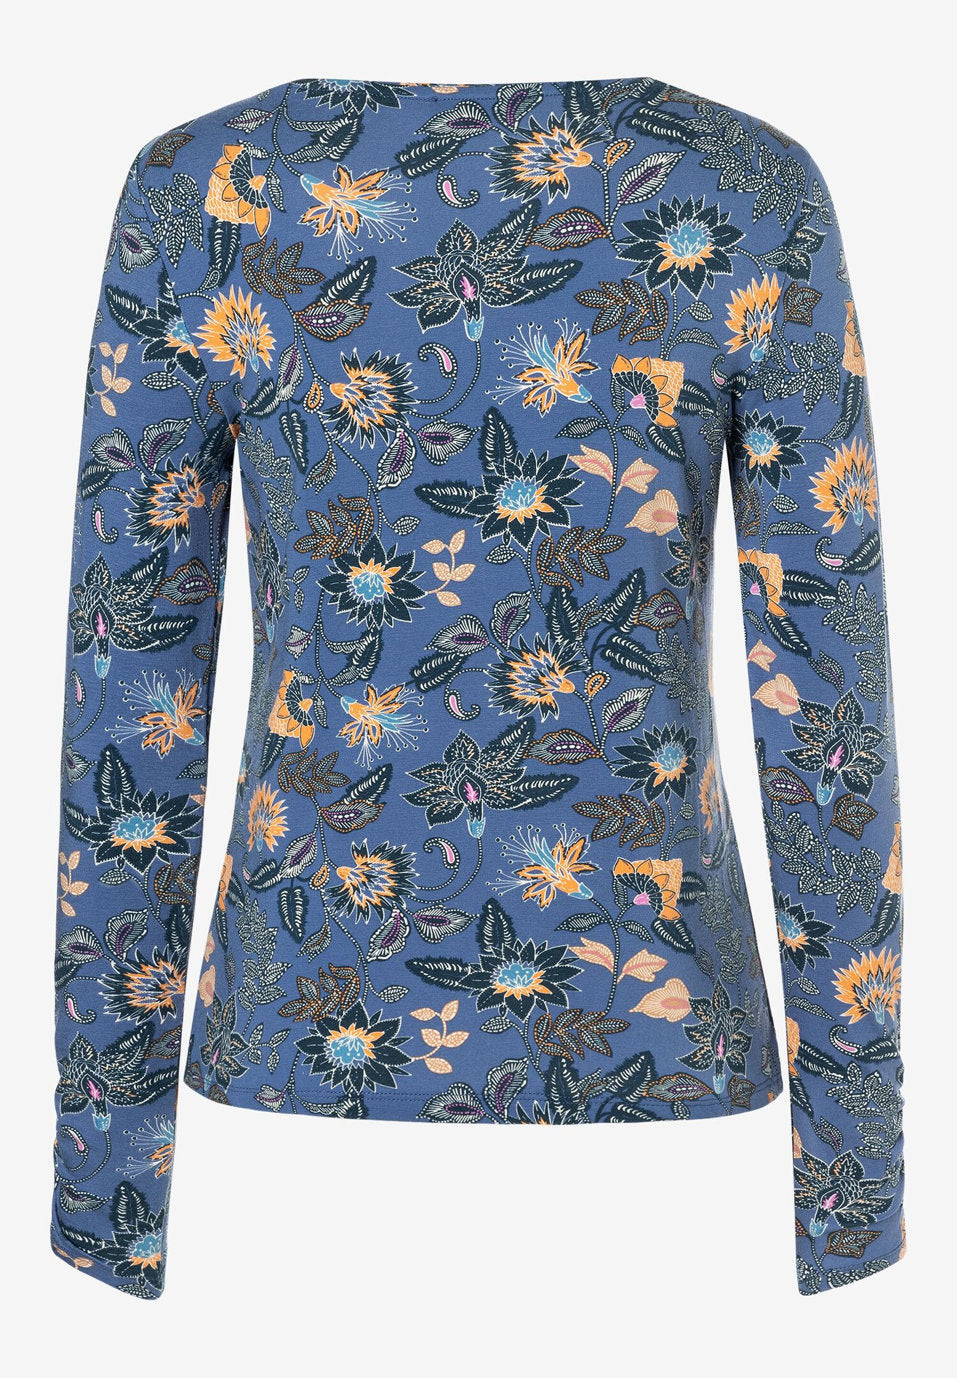 Long-Sleeved Shirt With Paisley Print, Smoke Blue, Autumn Collection_31090003_5322_02